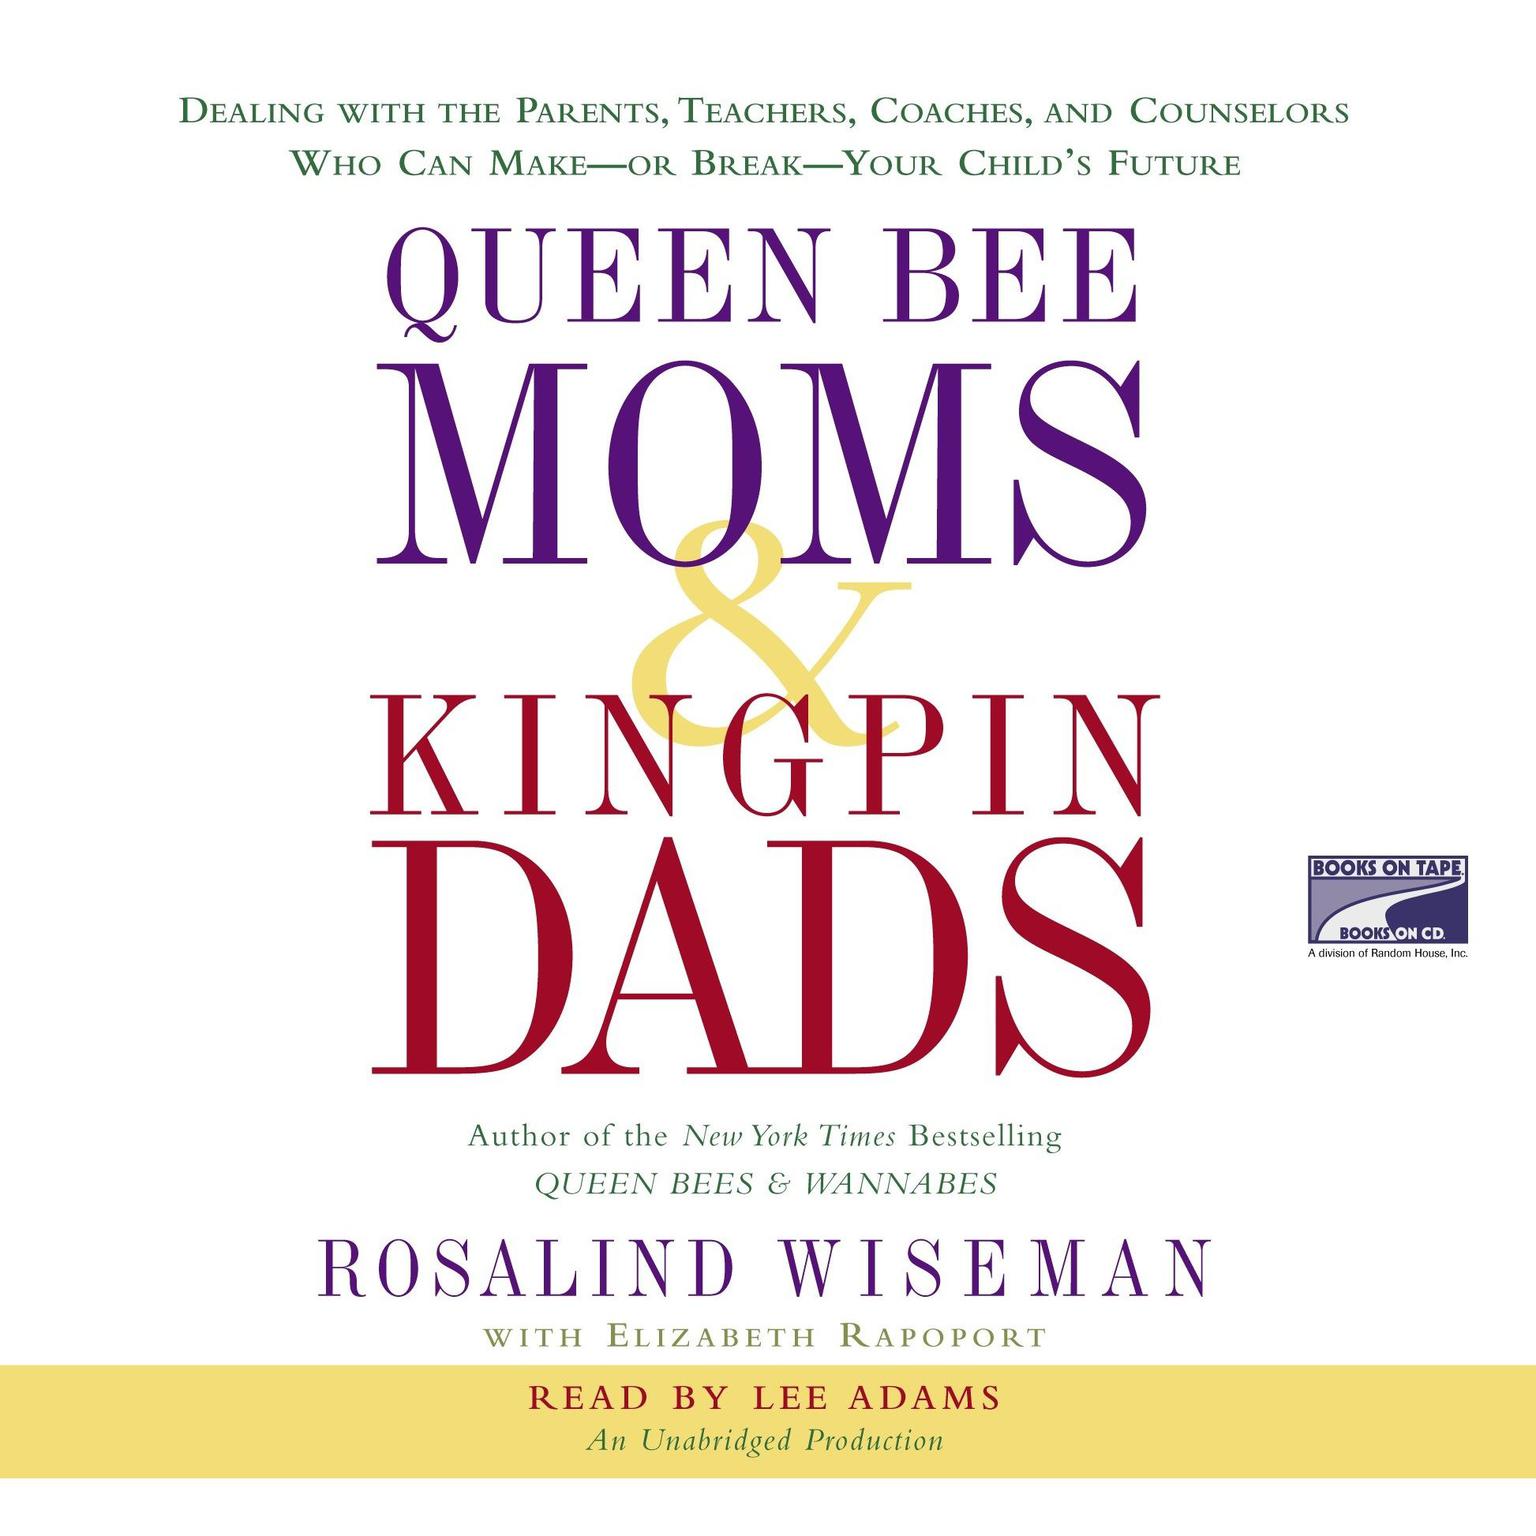 Queen Bee Moms & Kingpin Dads: Dealing with the Parents, Teachers, Coaches, and Counselors Who Can Make--or Break--Your Childs Future Audiobook, by Rosalind Wiseman